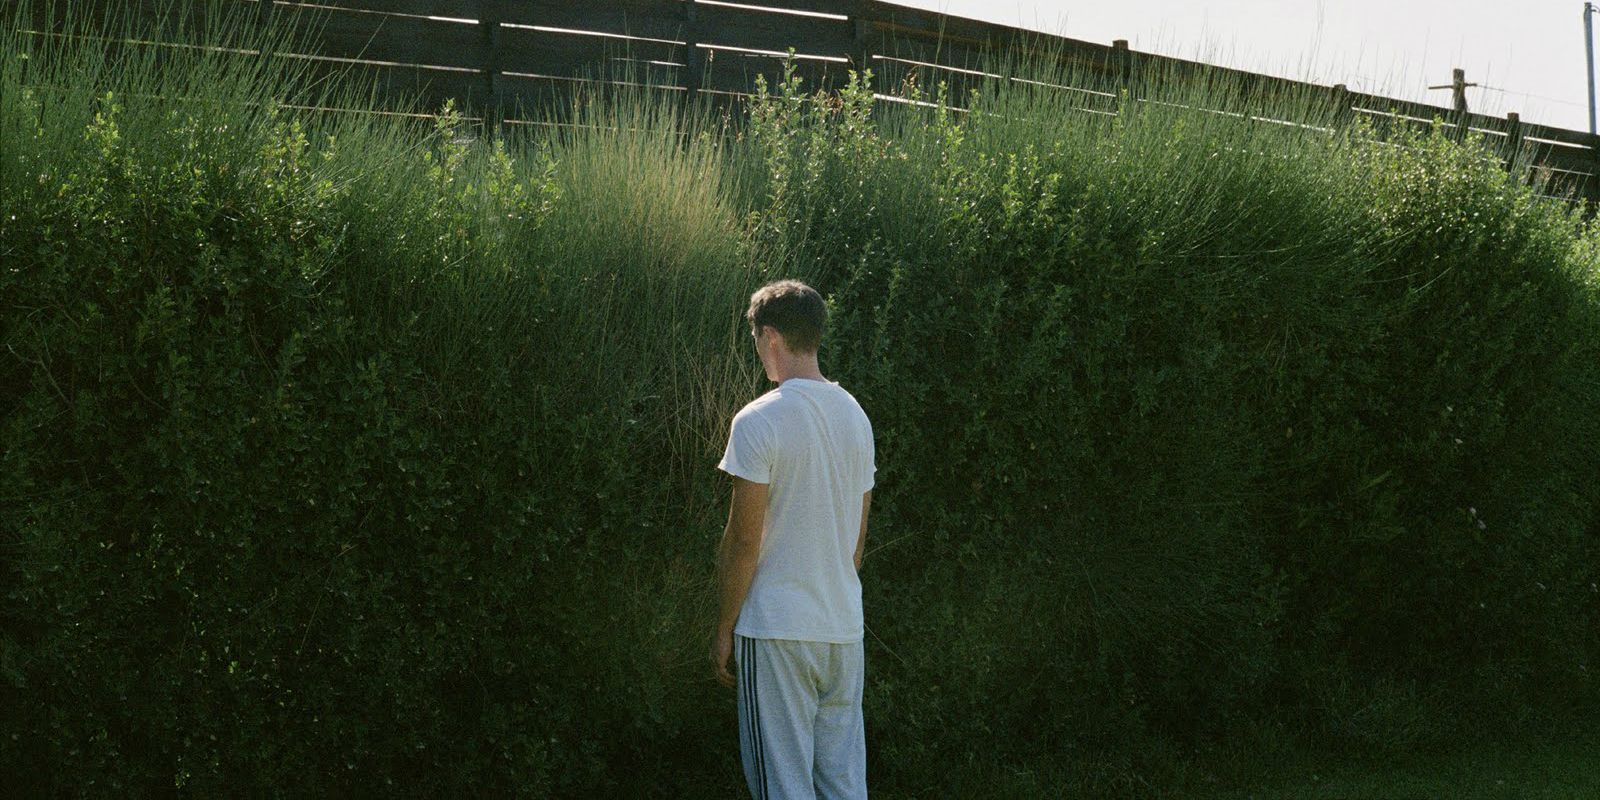 A character in Dogtooth looking into the grass